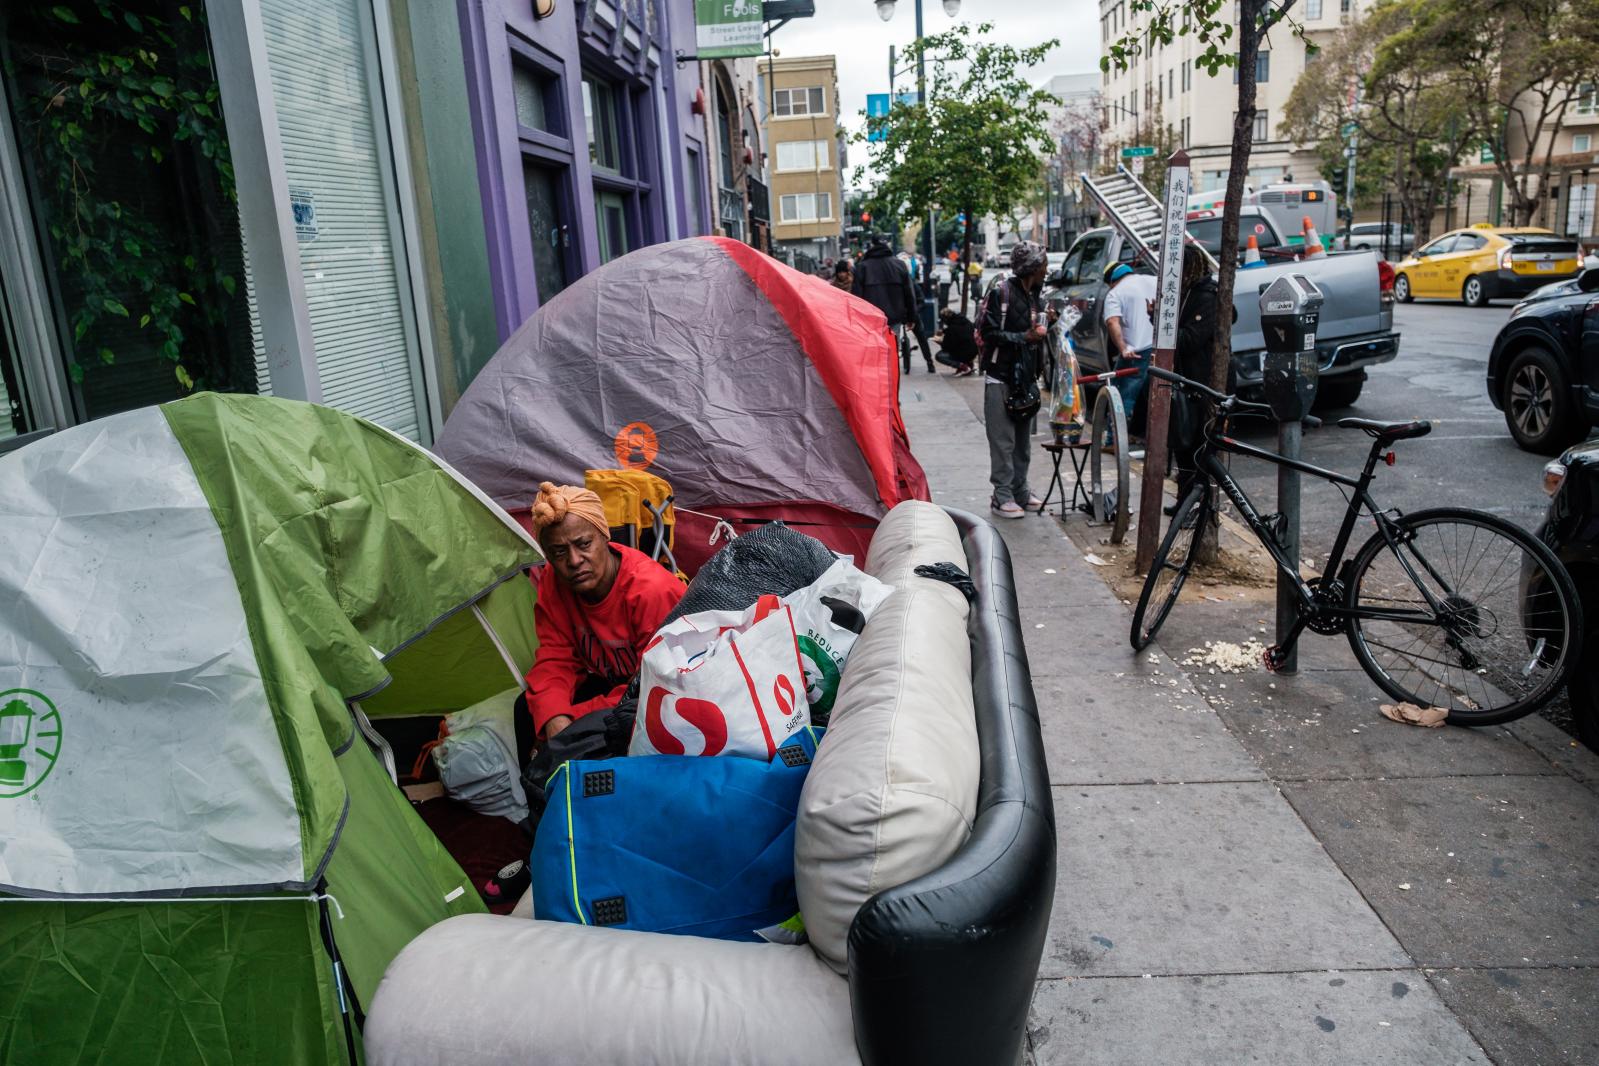 Image from San Francisco's Housing Crisis - People are seen near a row of tents in the Tenderloin in...